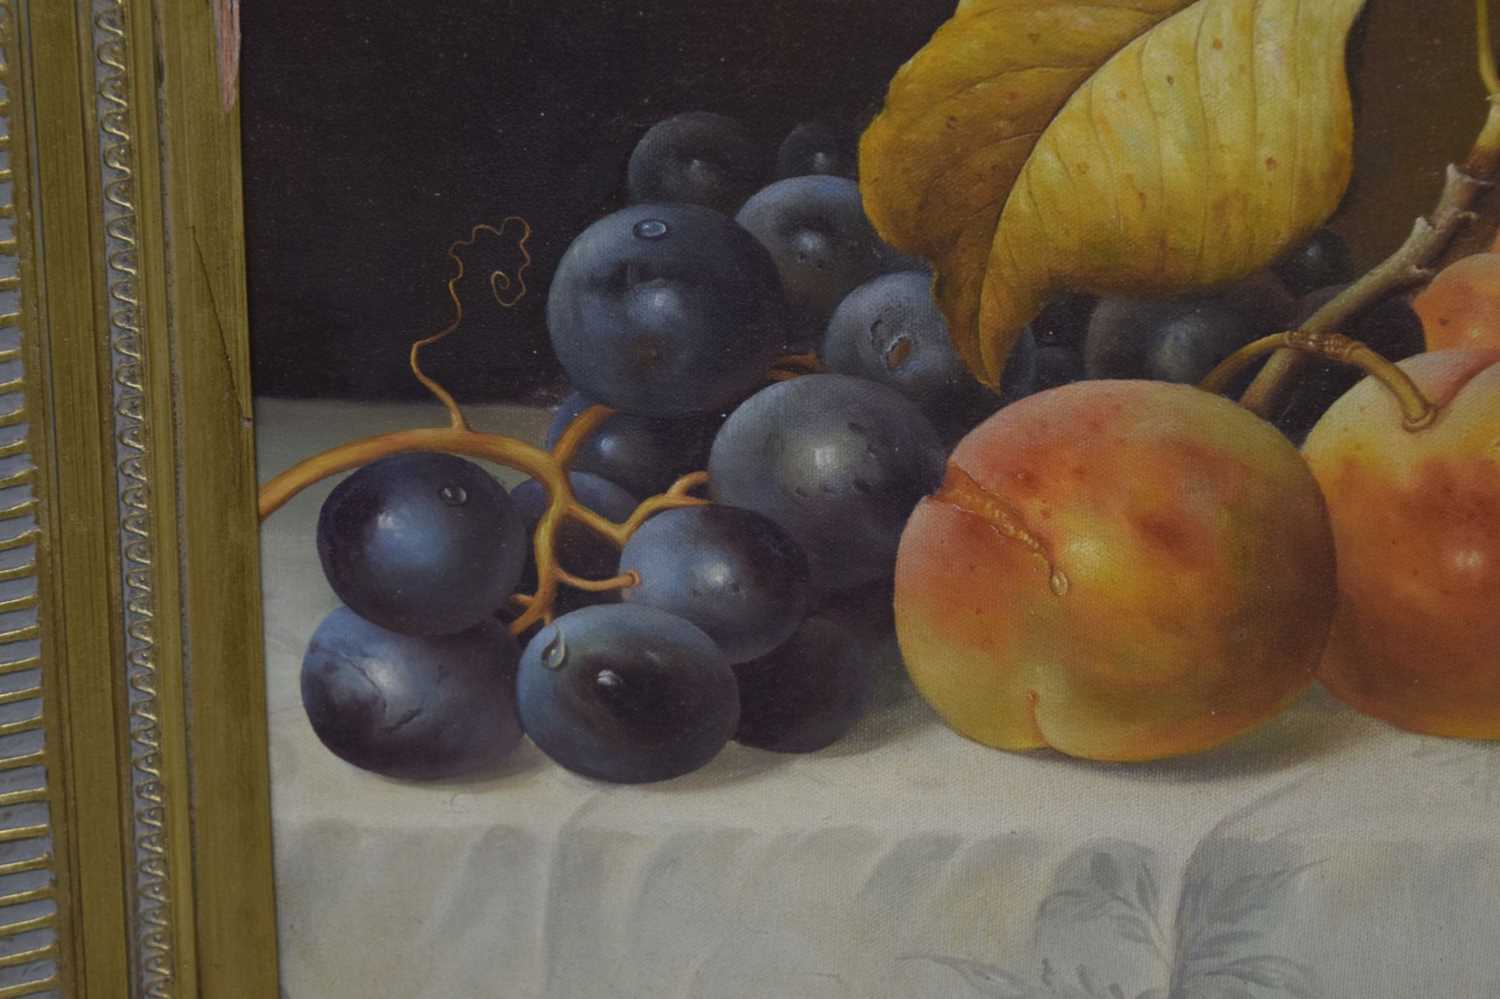 20th century British school - Oil on canvas - Still life with fruit - Image 4 of 8